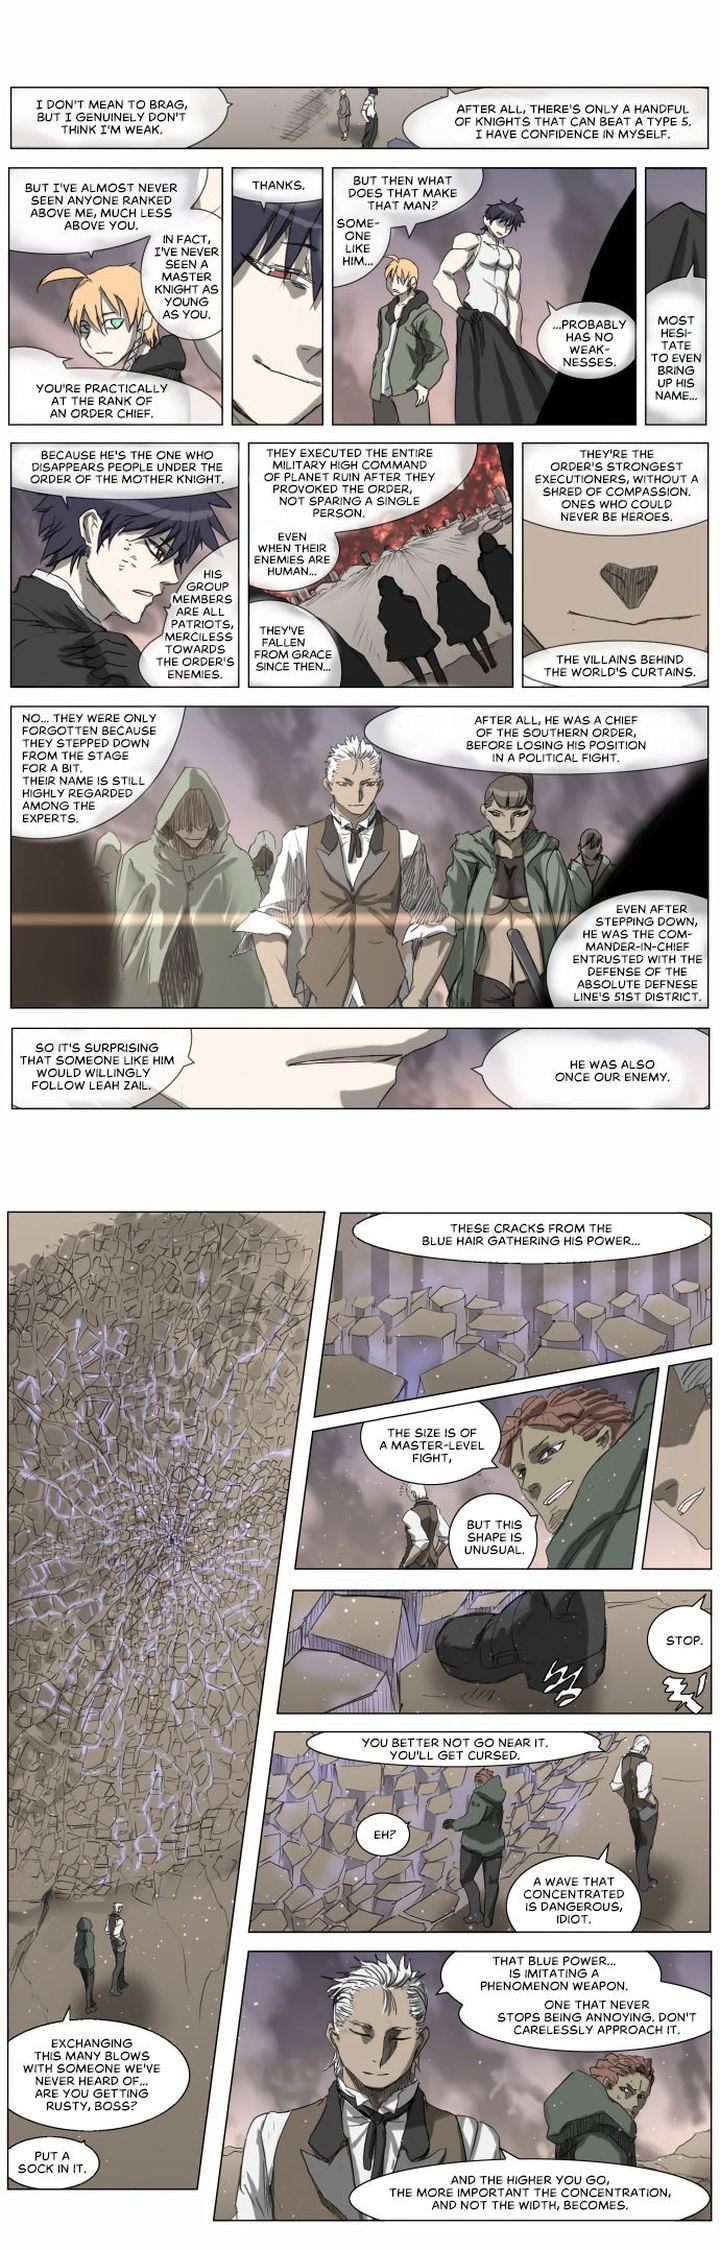 Knight Run Chapter 205 Page 1